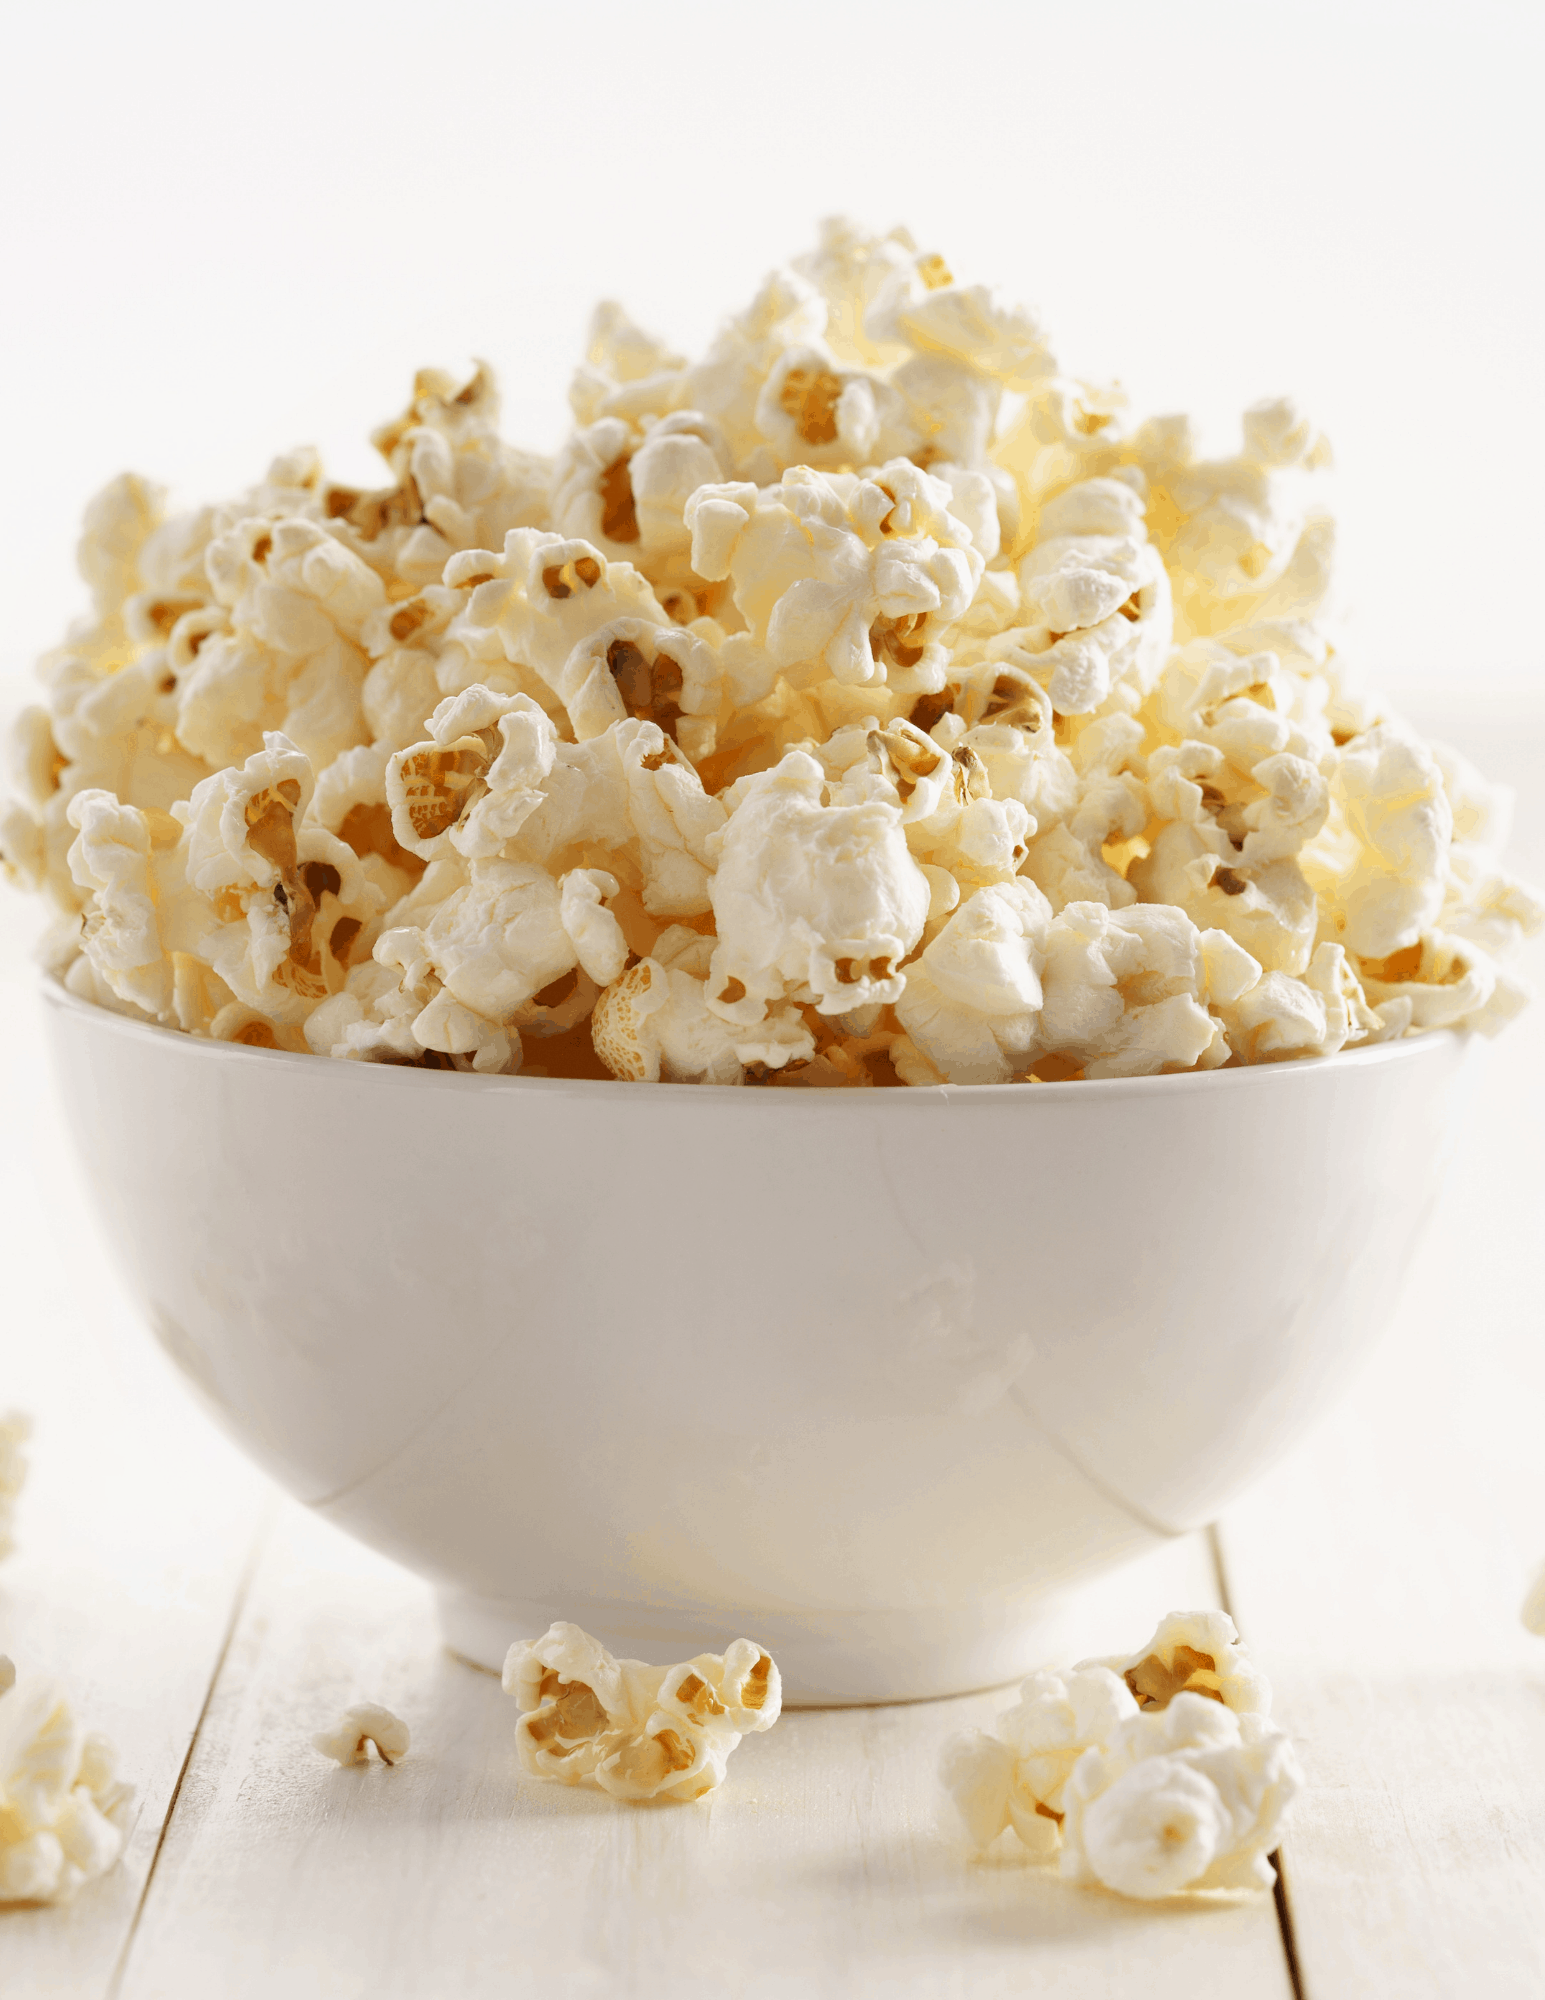 Is Popcorn Keto? Carbs, Calories, and More